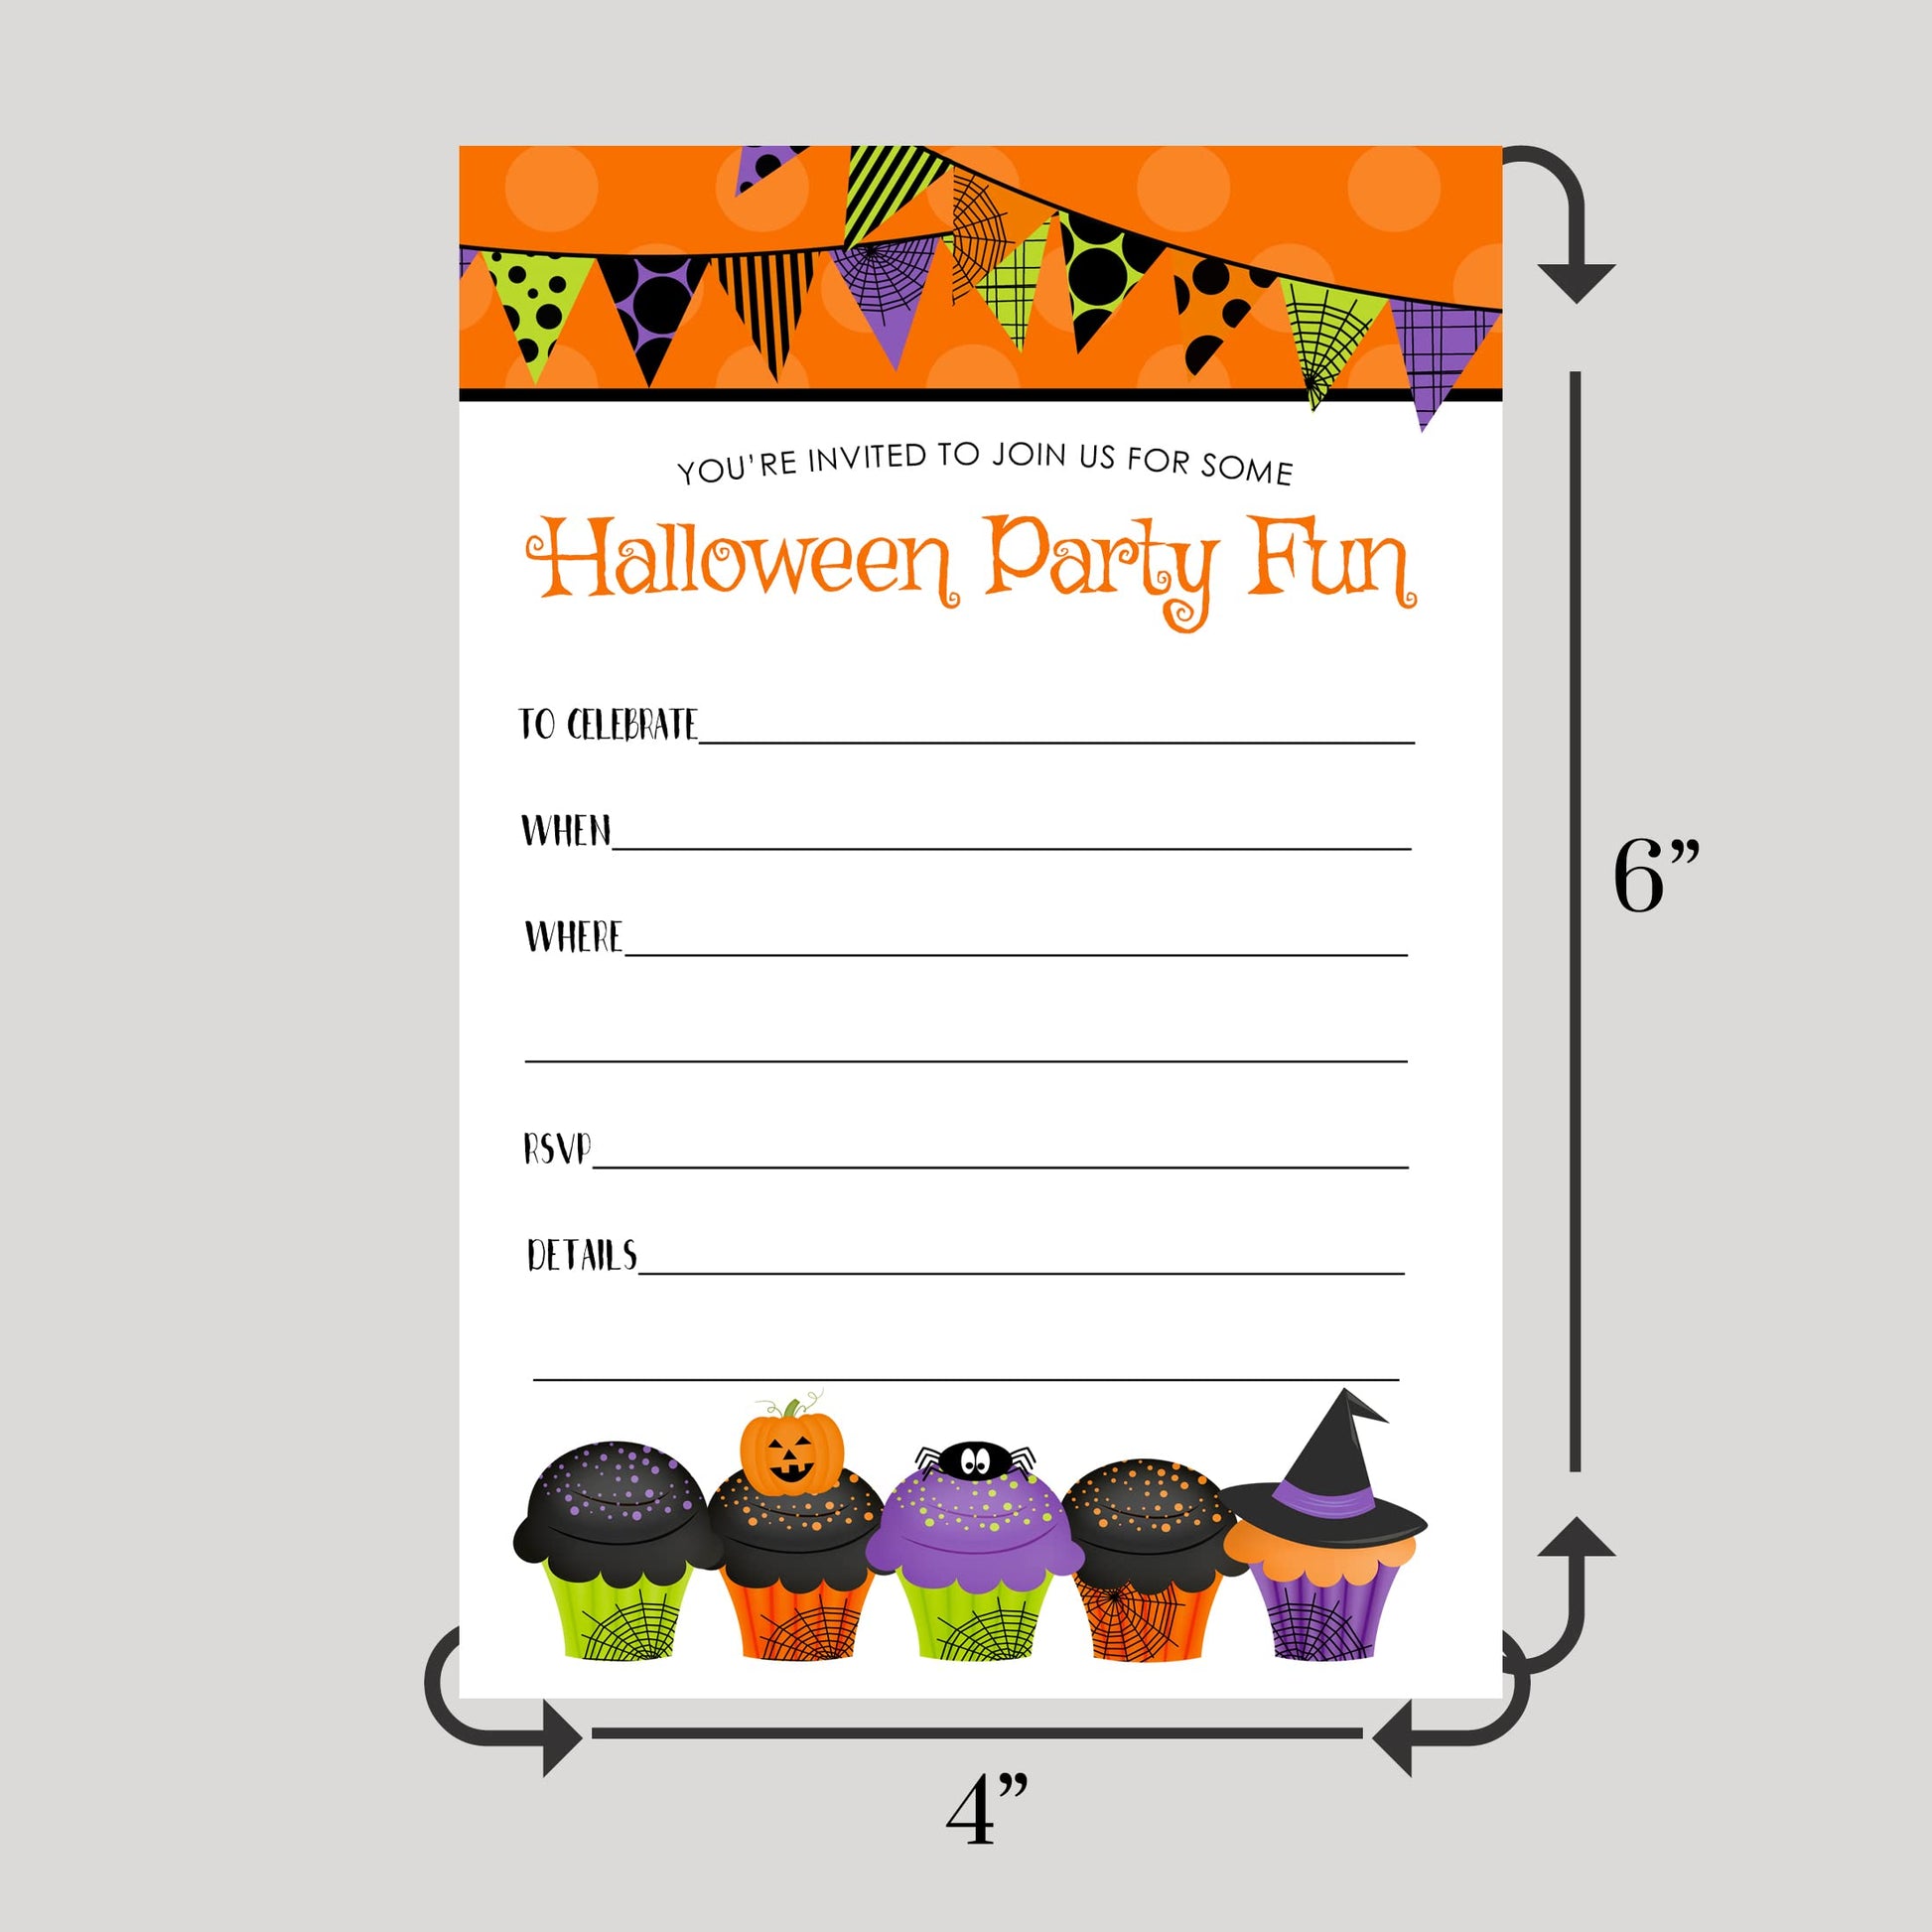 Envelopes 15 Guests - Halloween Invitations Kids Costume Party - Cute Spider, Ghost, Pumpkin Theme Set 4x6 Printed CardsPaper Clever Party